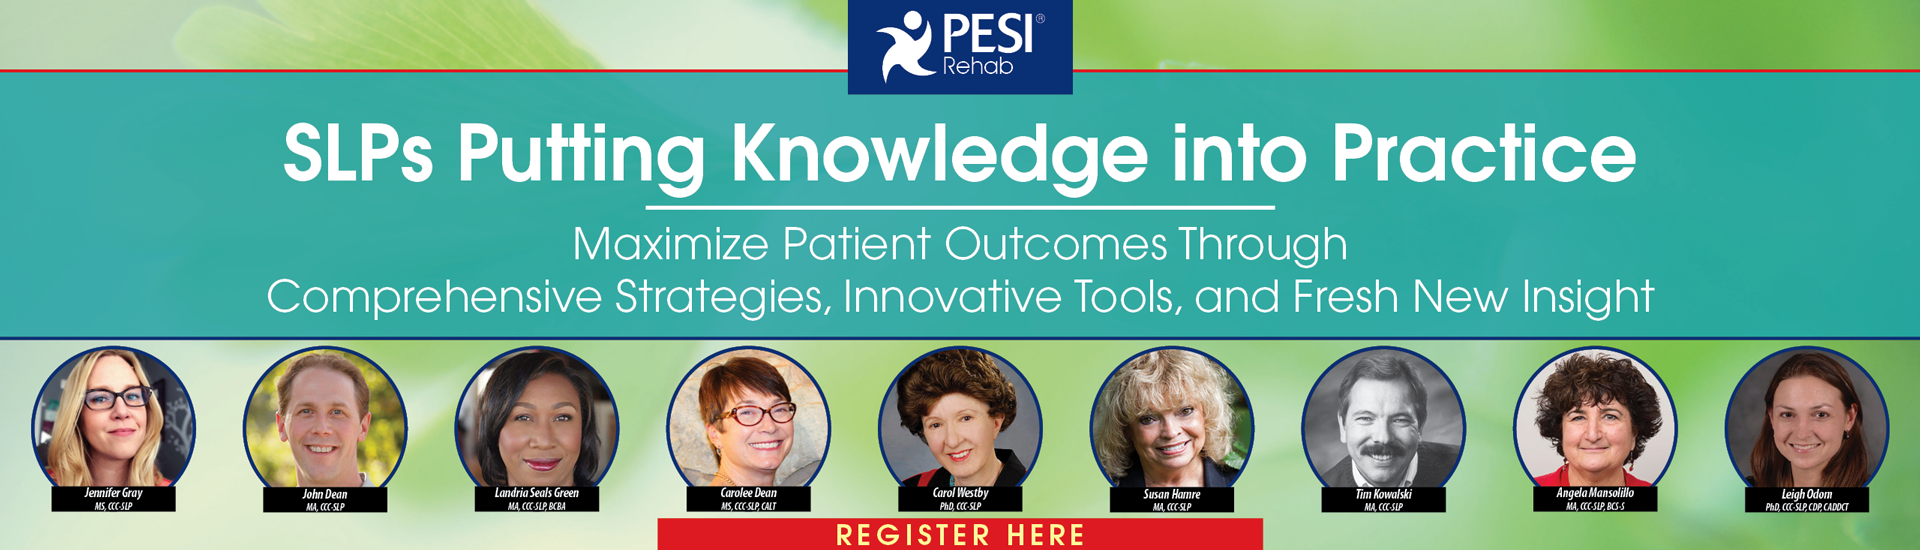 SLPs Putting Knowledge into Practice: Maximize Patient Outcomes Through Comprehensive Strategies, Innovative Tools, and Fresh New Insight